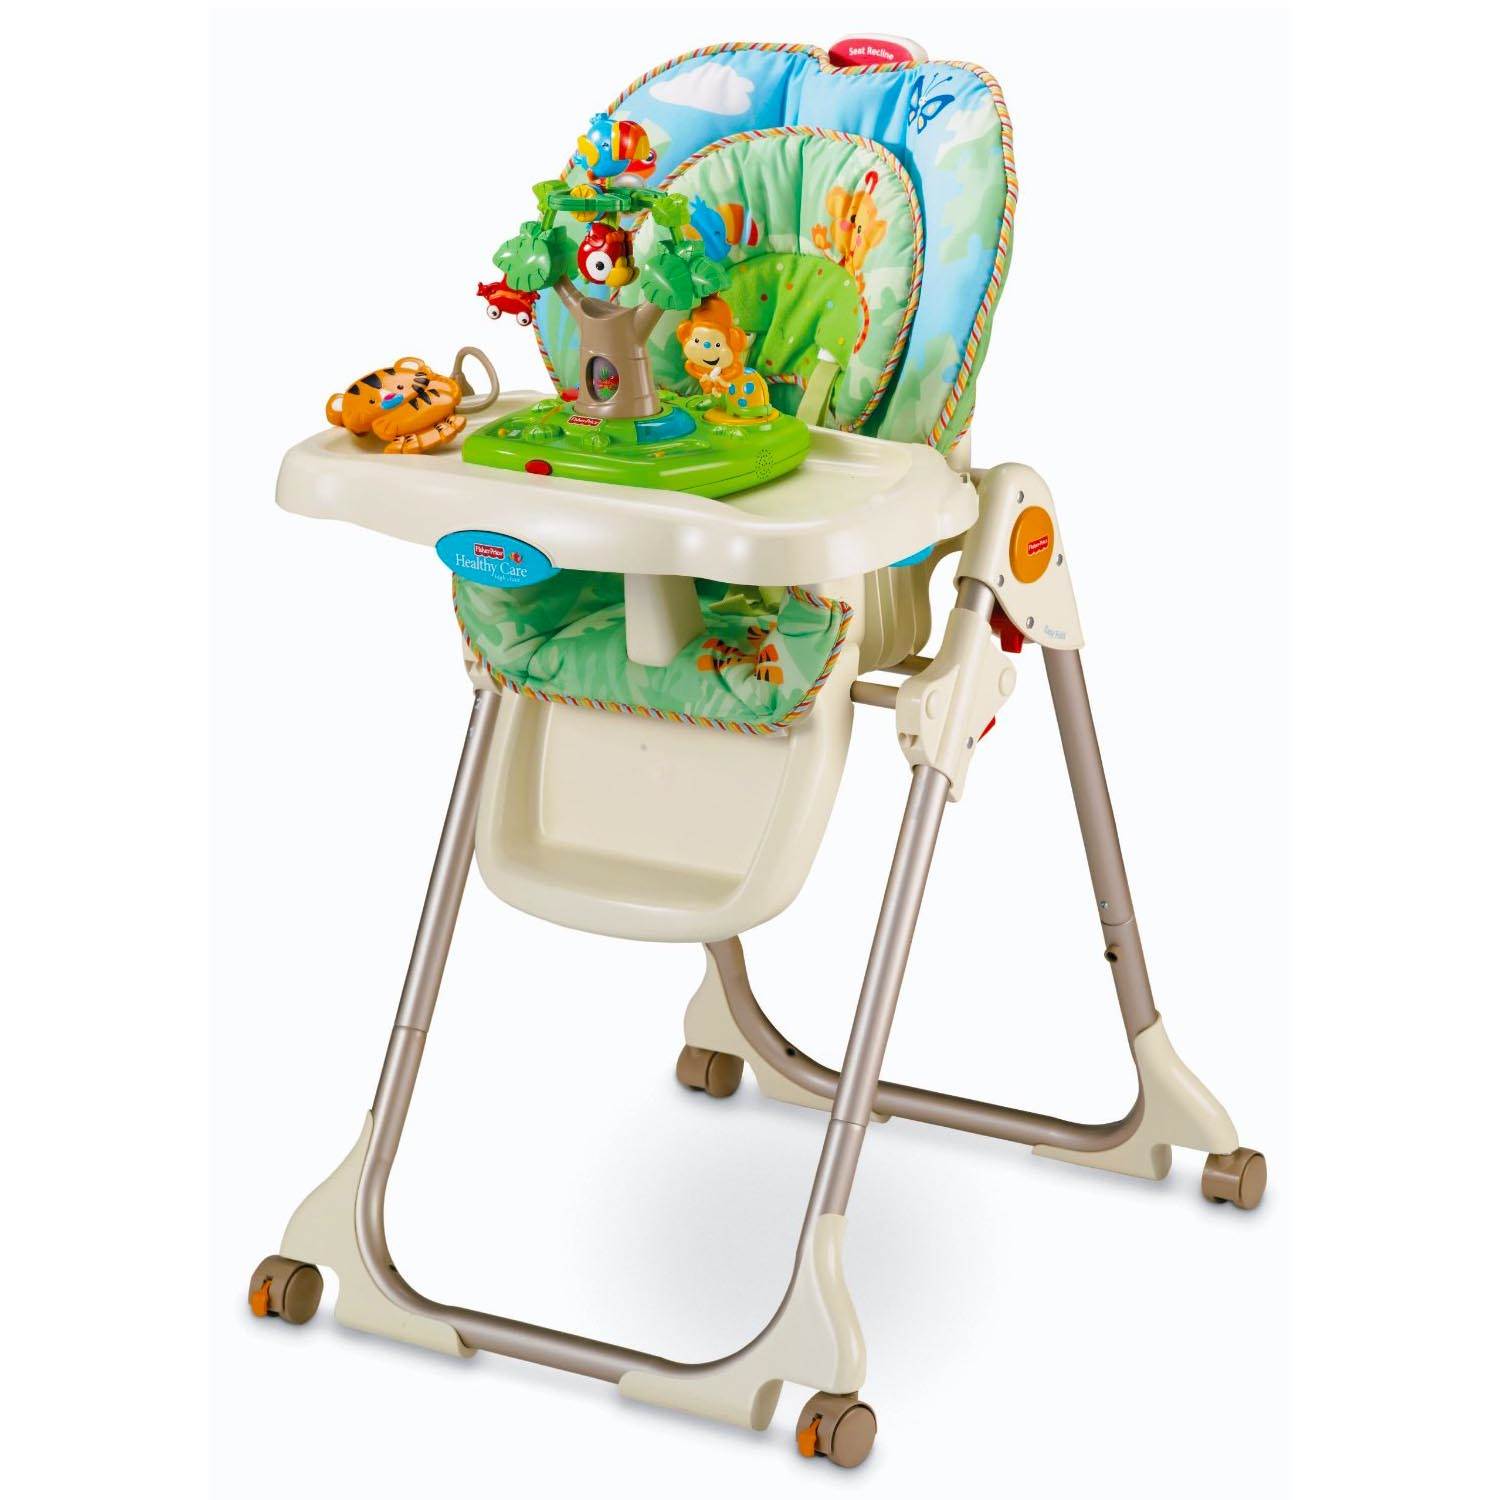 Fisher Price Rainforest Healthy Care High Chair with Dishwasher Safe Tray W3066 - image 2 of 5